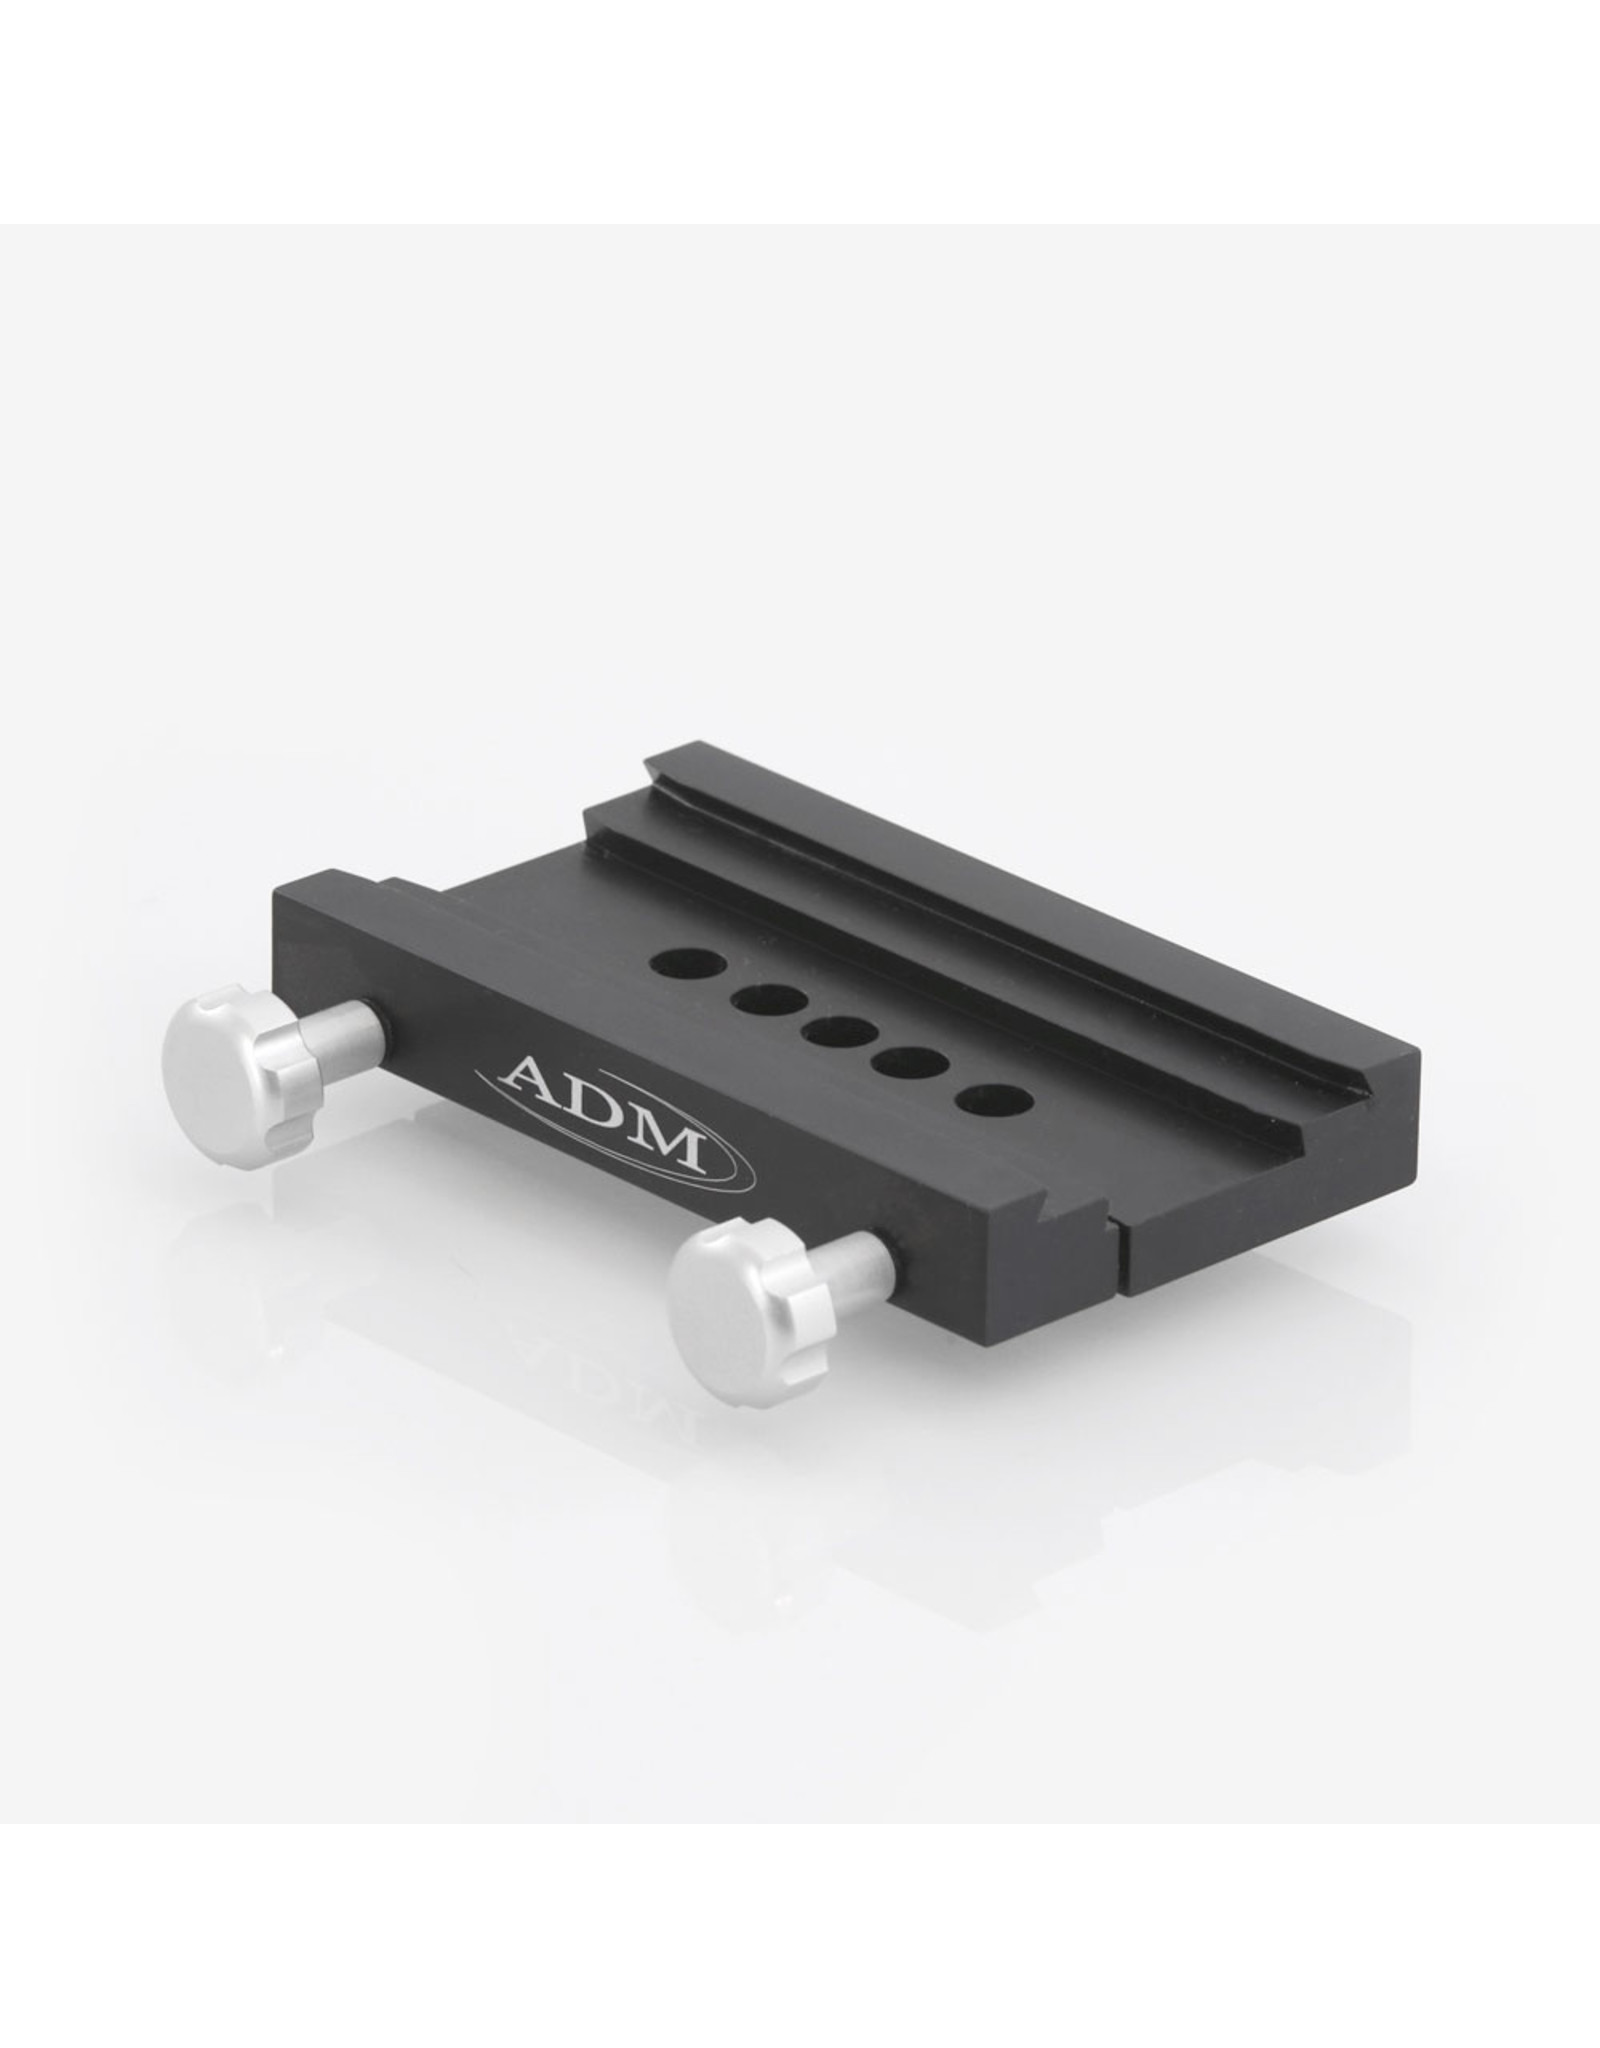 ADM ADM DUAL Series Saddle For Zeiss Dovetail | 8mm Counterbored Version